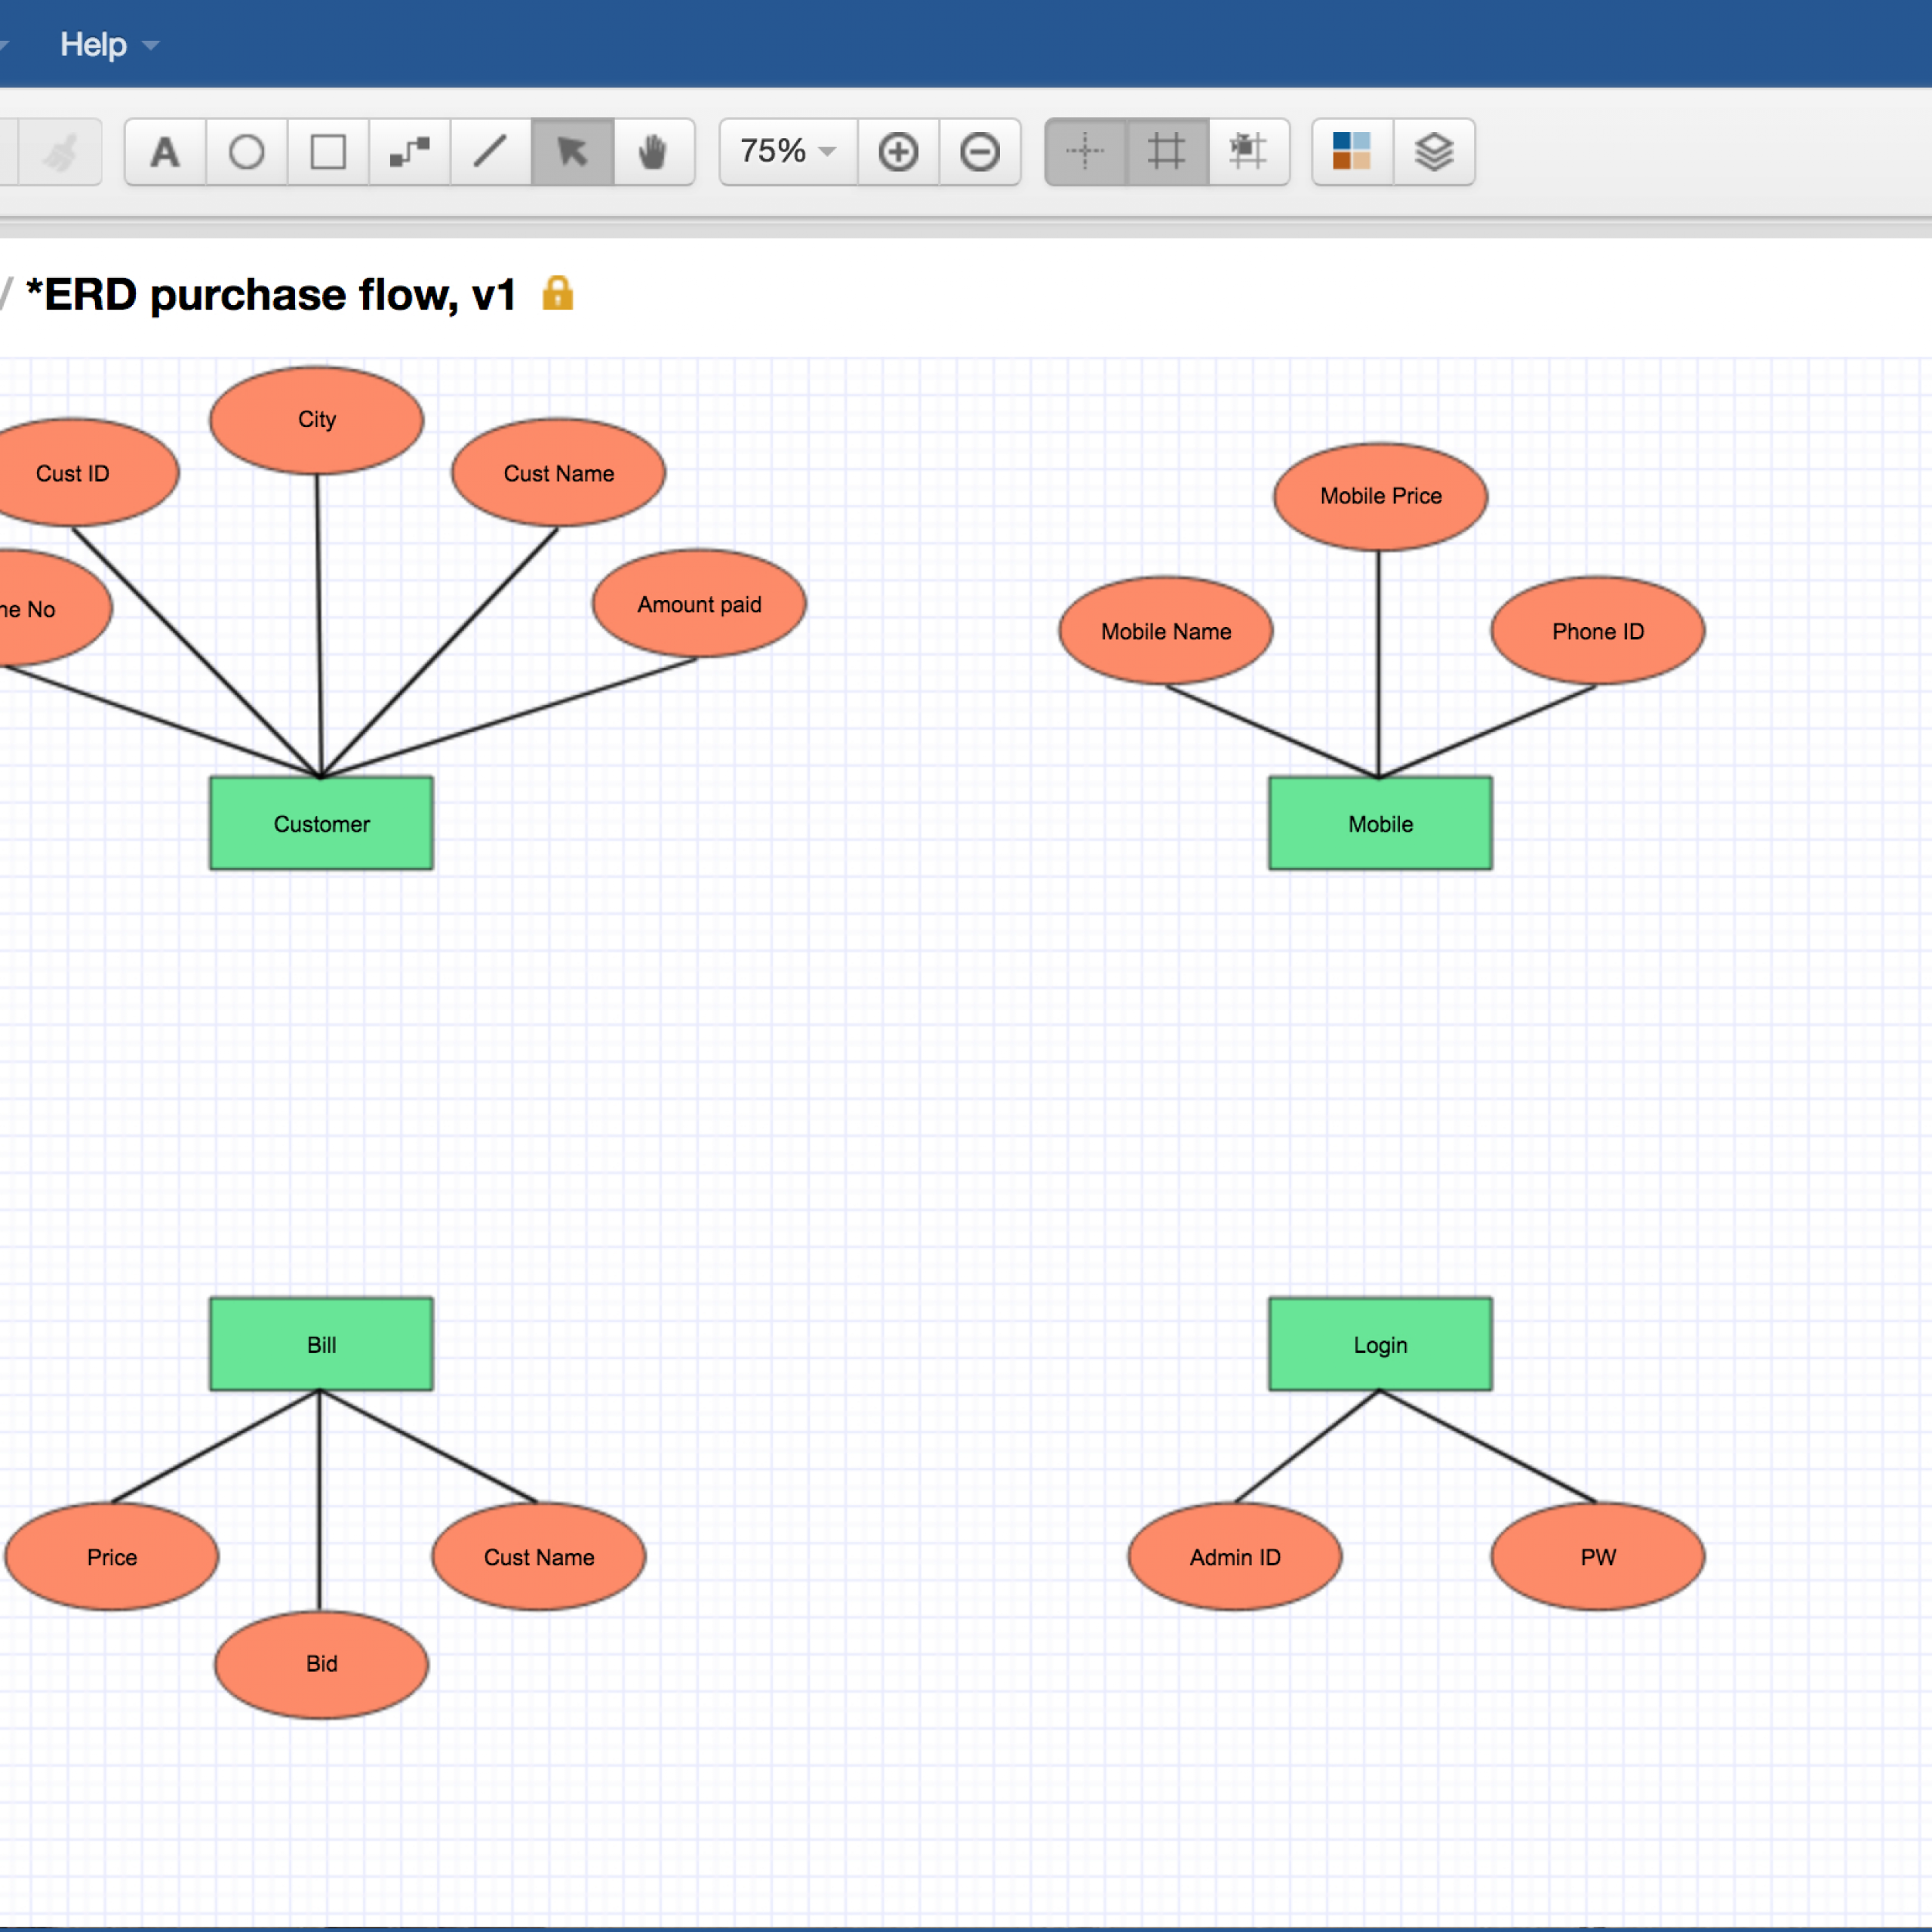 How To Draw An Entity-Relationship Diagram in Er Diagram Shapes